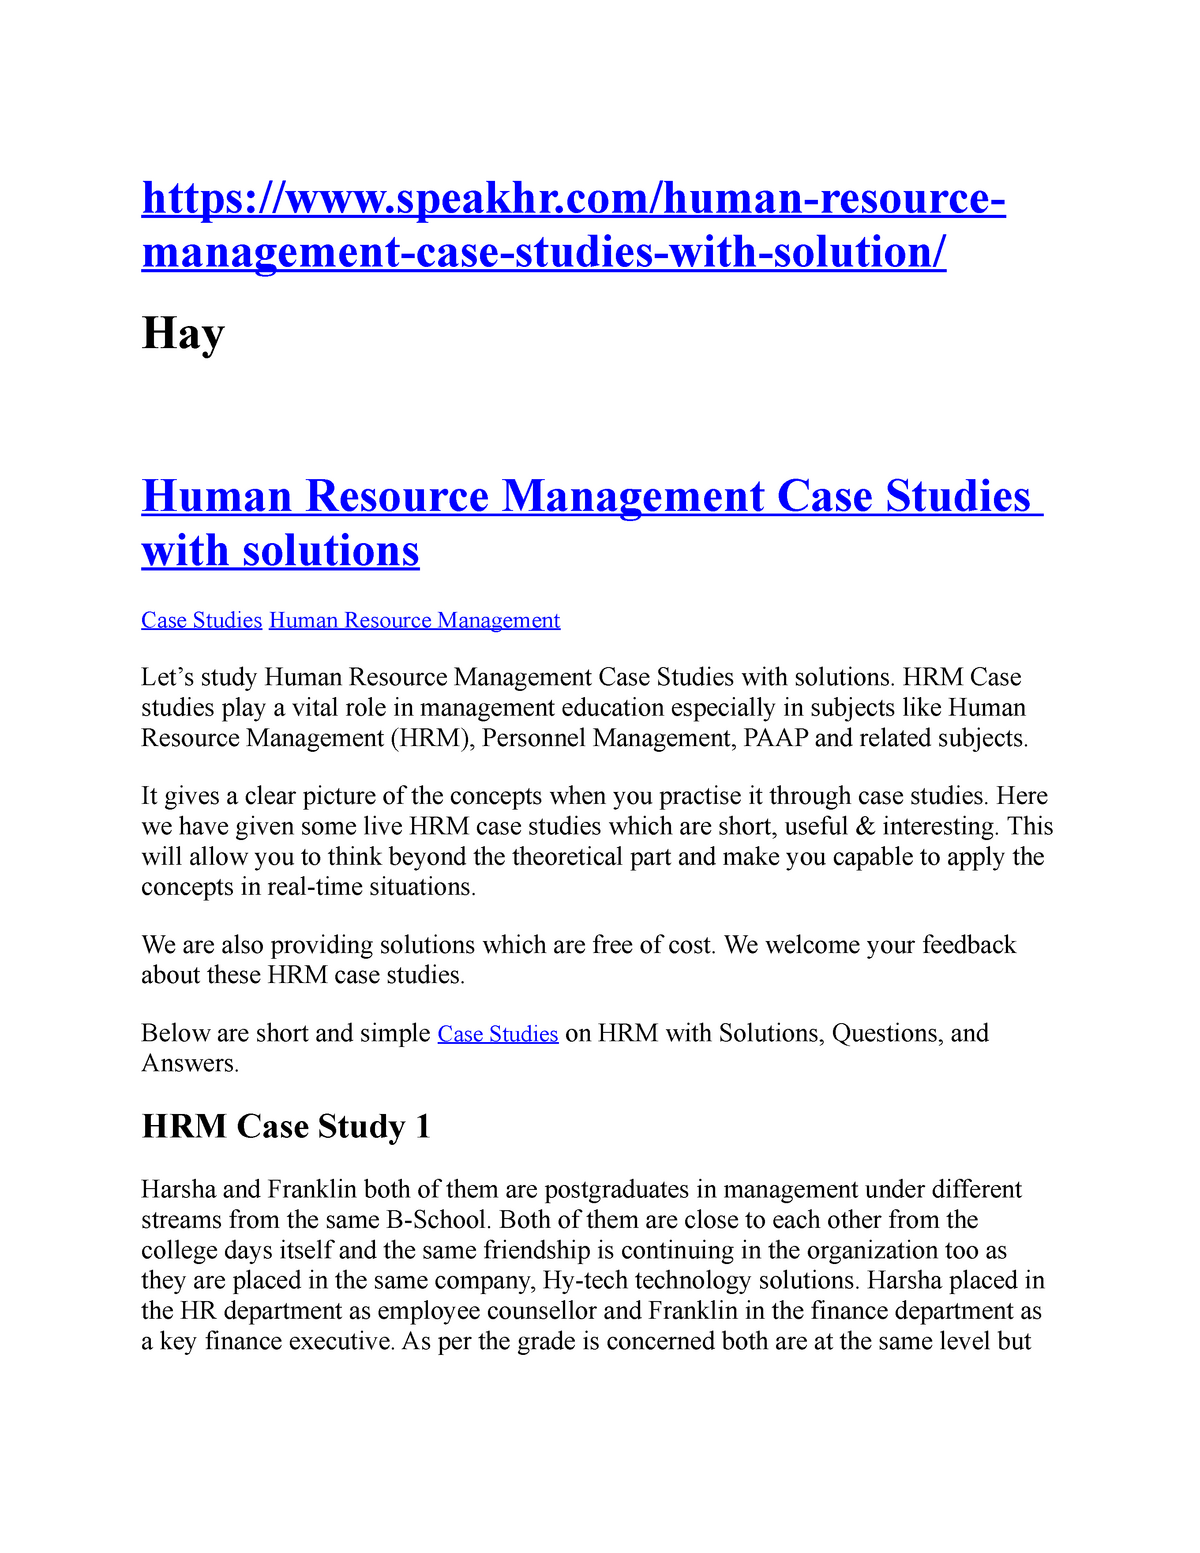 short case study on international hrm with solution